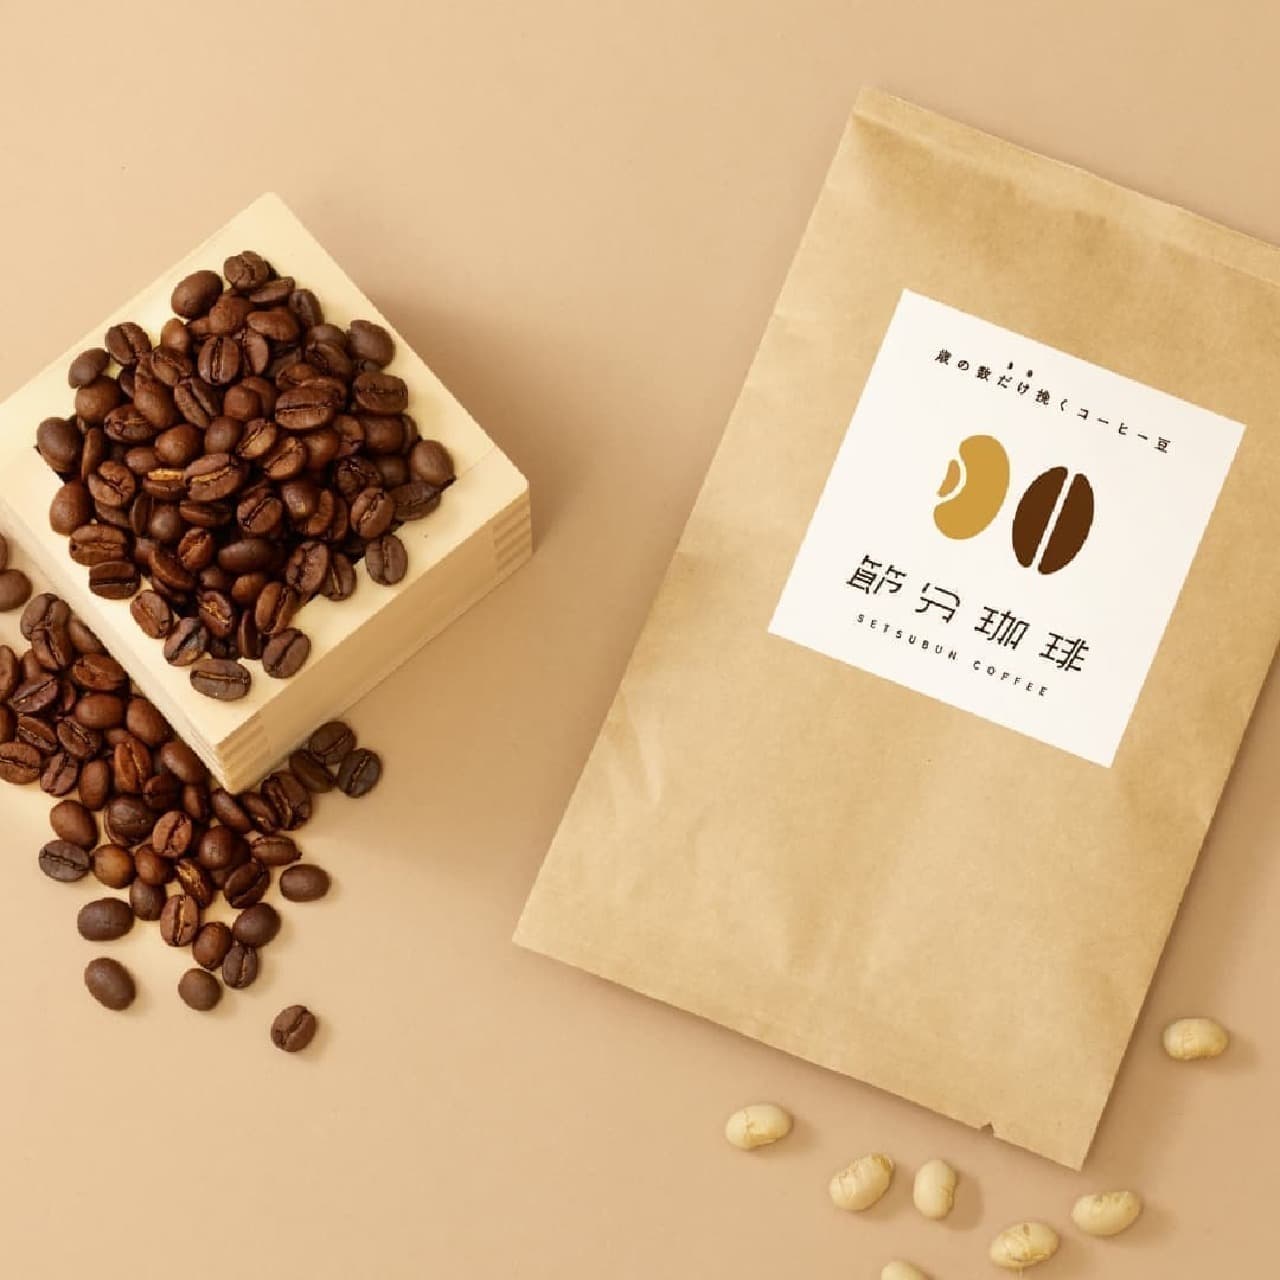 Coffee beans "Setsubun coffee" that is ground by the number of years old